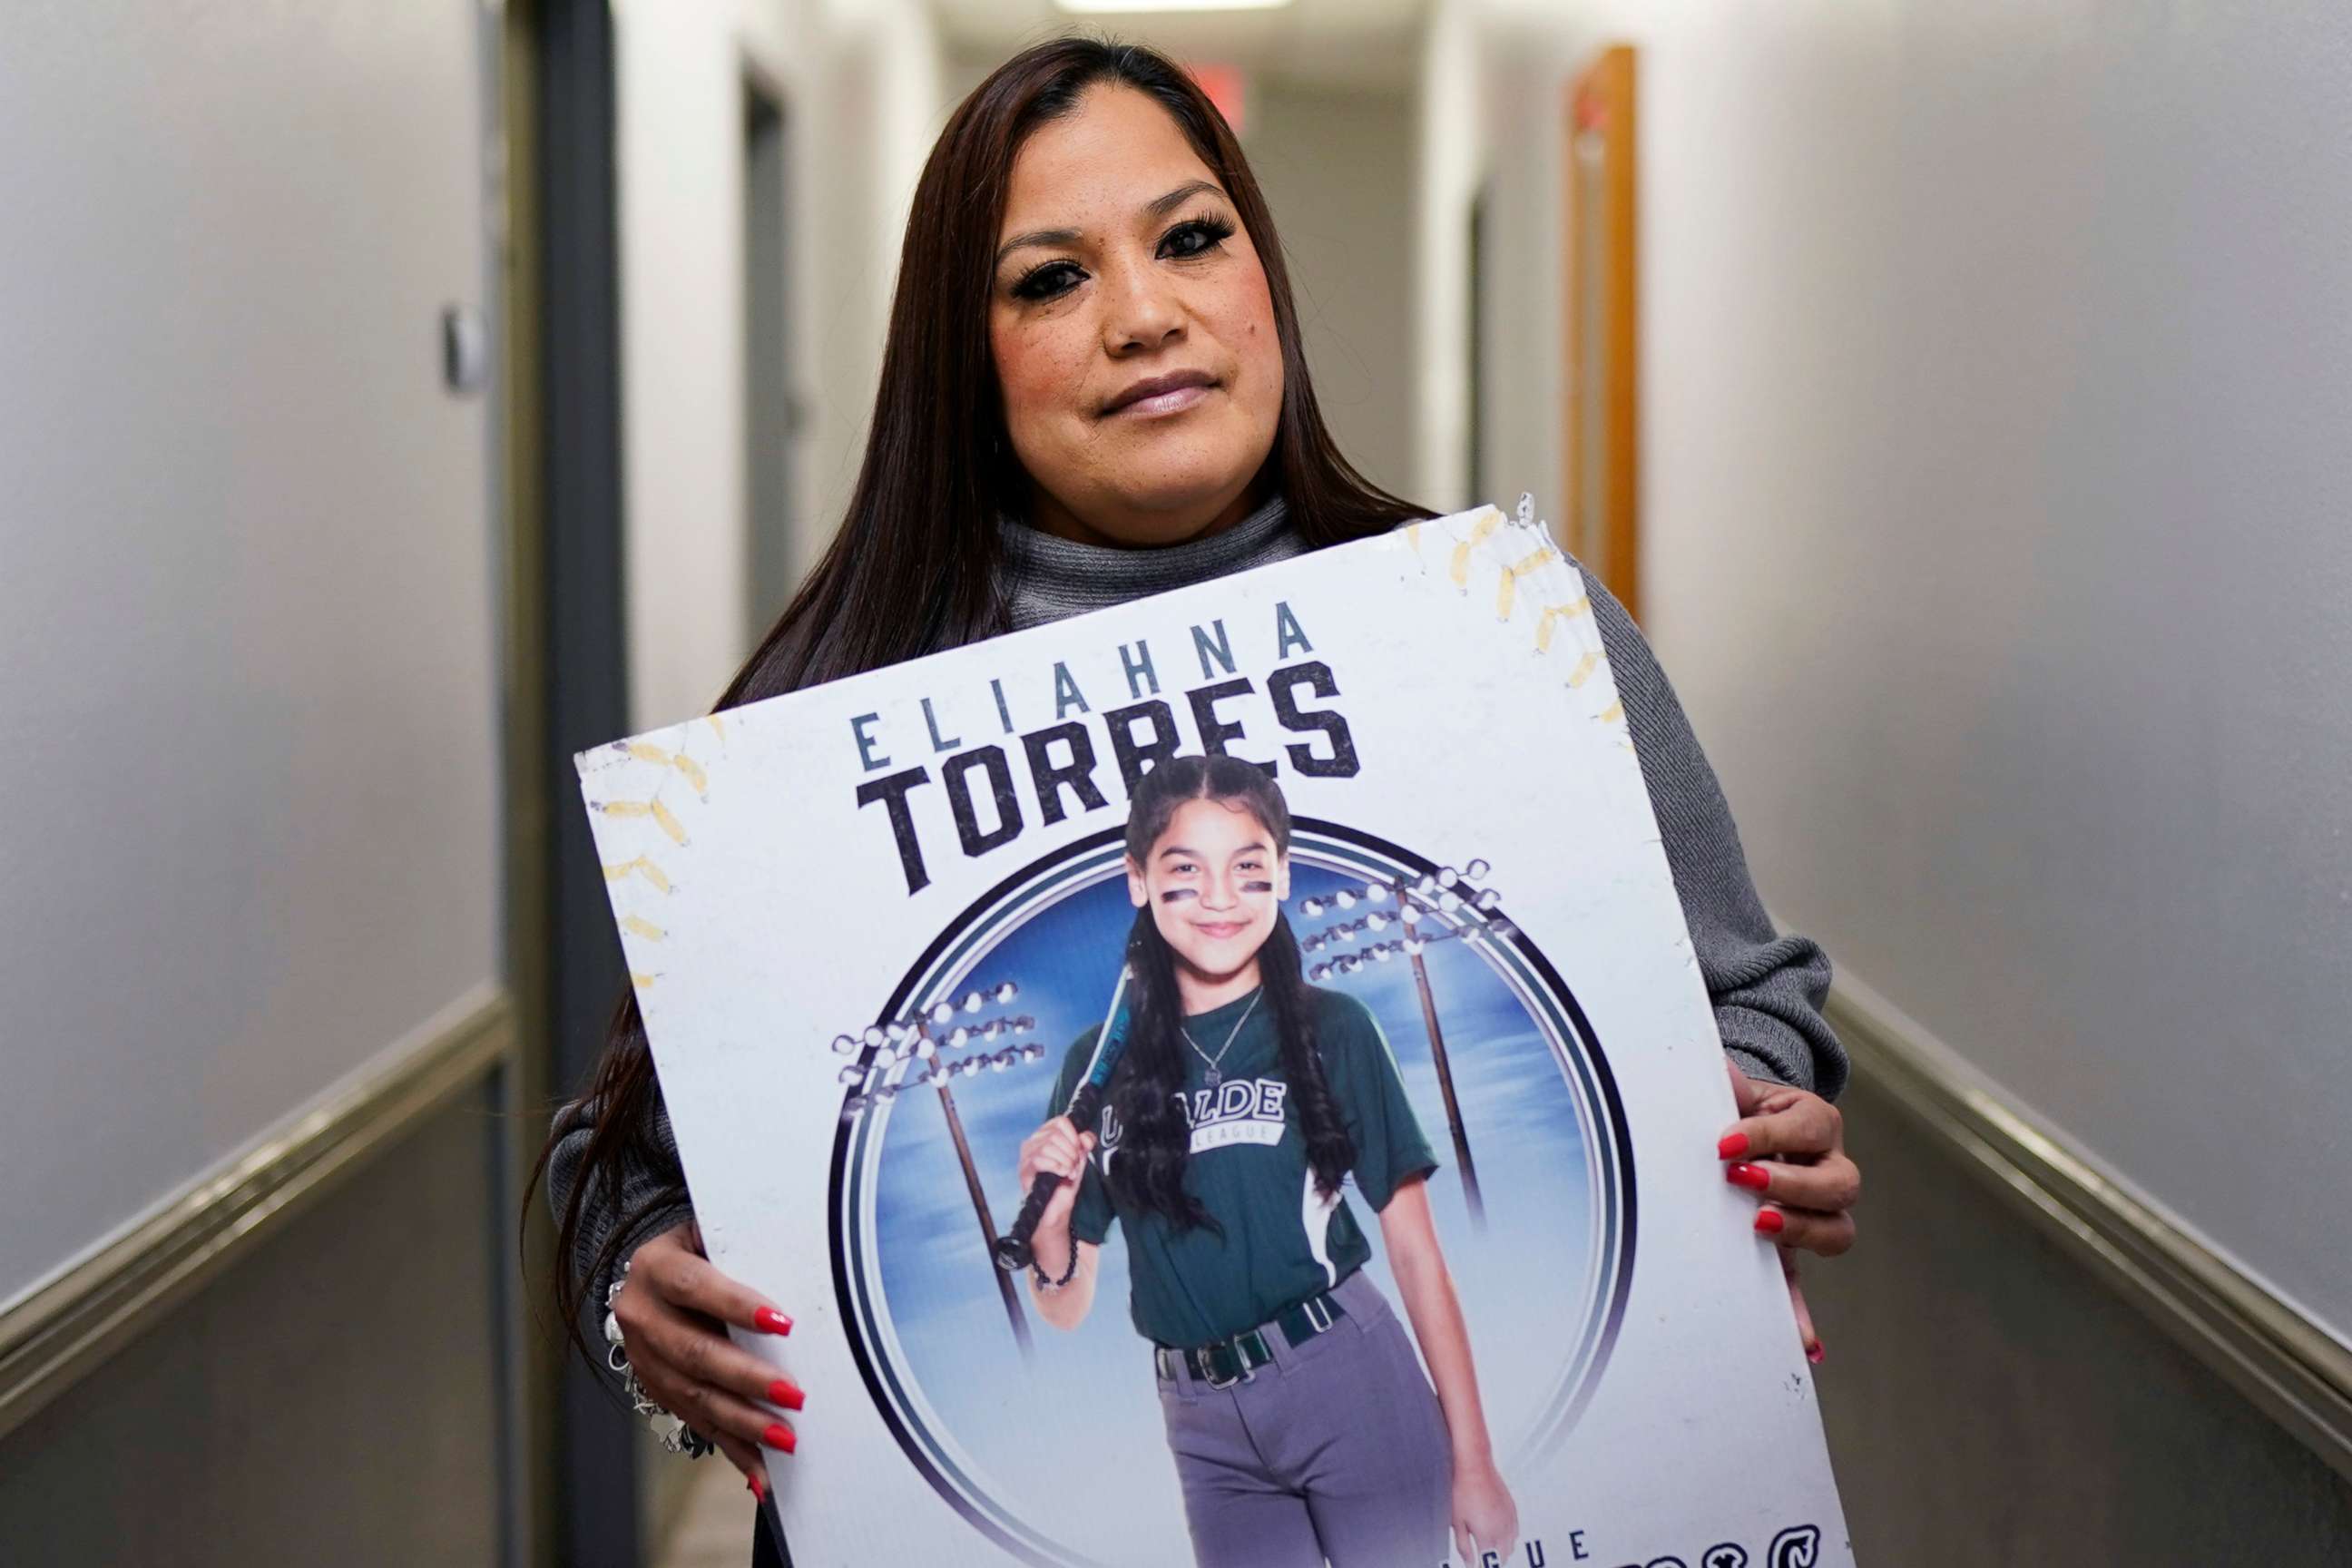 PHOTO: Sandra Torres, holds a photo of her daughter Eliahna, who was one of 19 students and two teachers killed in the school shooting in Uvalde, Texas, at her attorney's office, Monday, Nov. 28, 2022, in San Antonio.